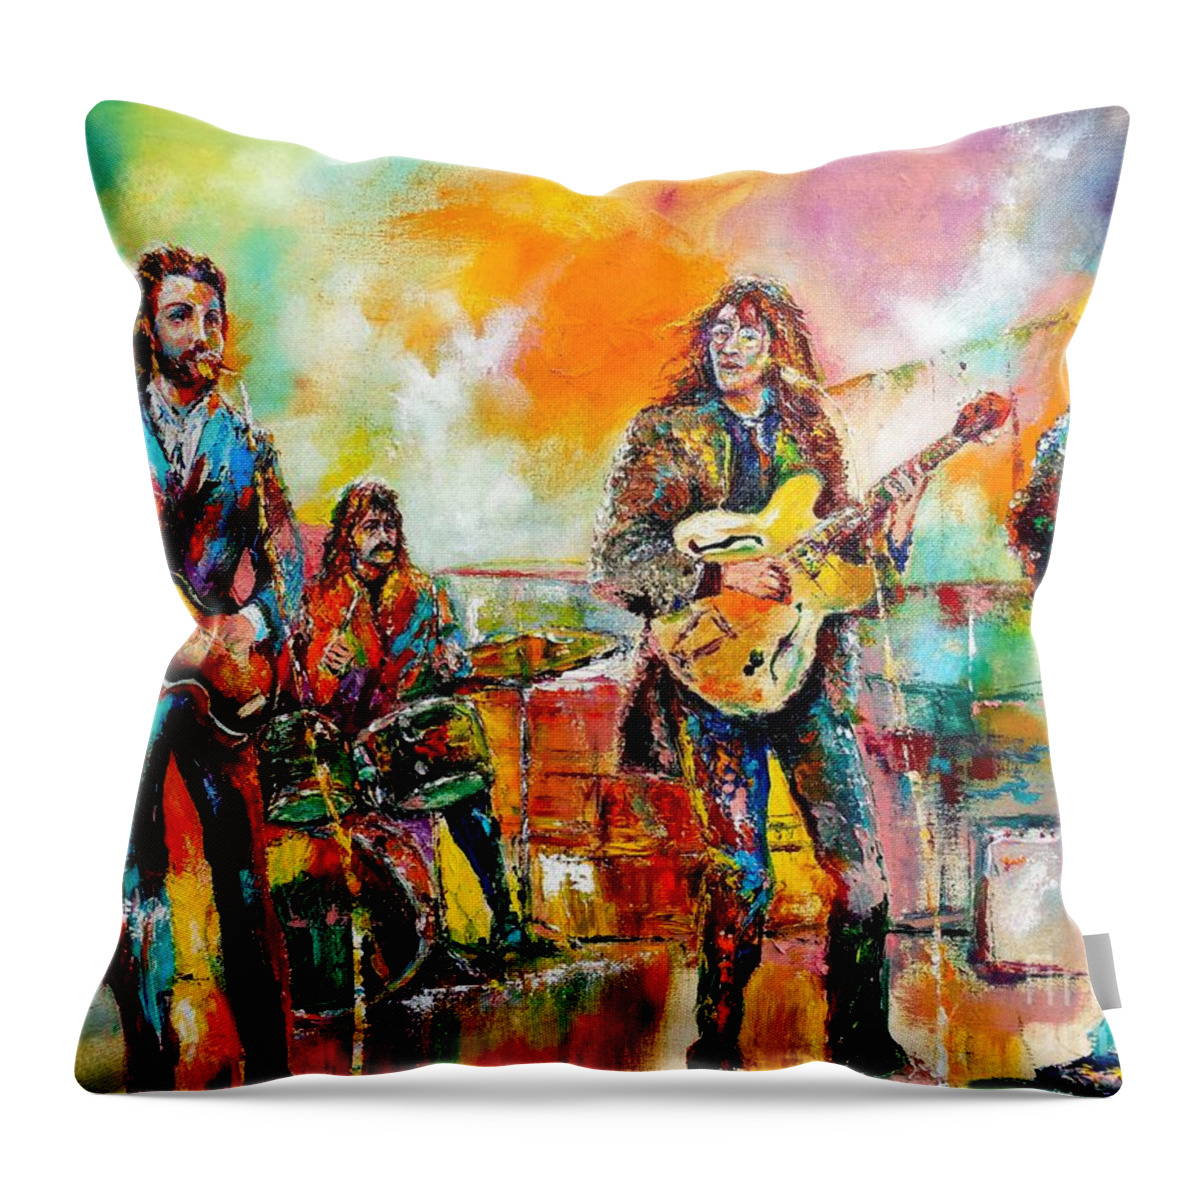 John Lennon Throw Pillow featuring the painting Beatles Rooftop Concert 2 by Leland Castro